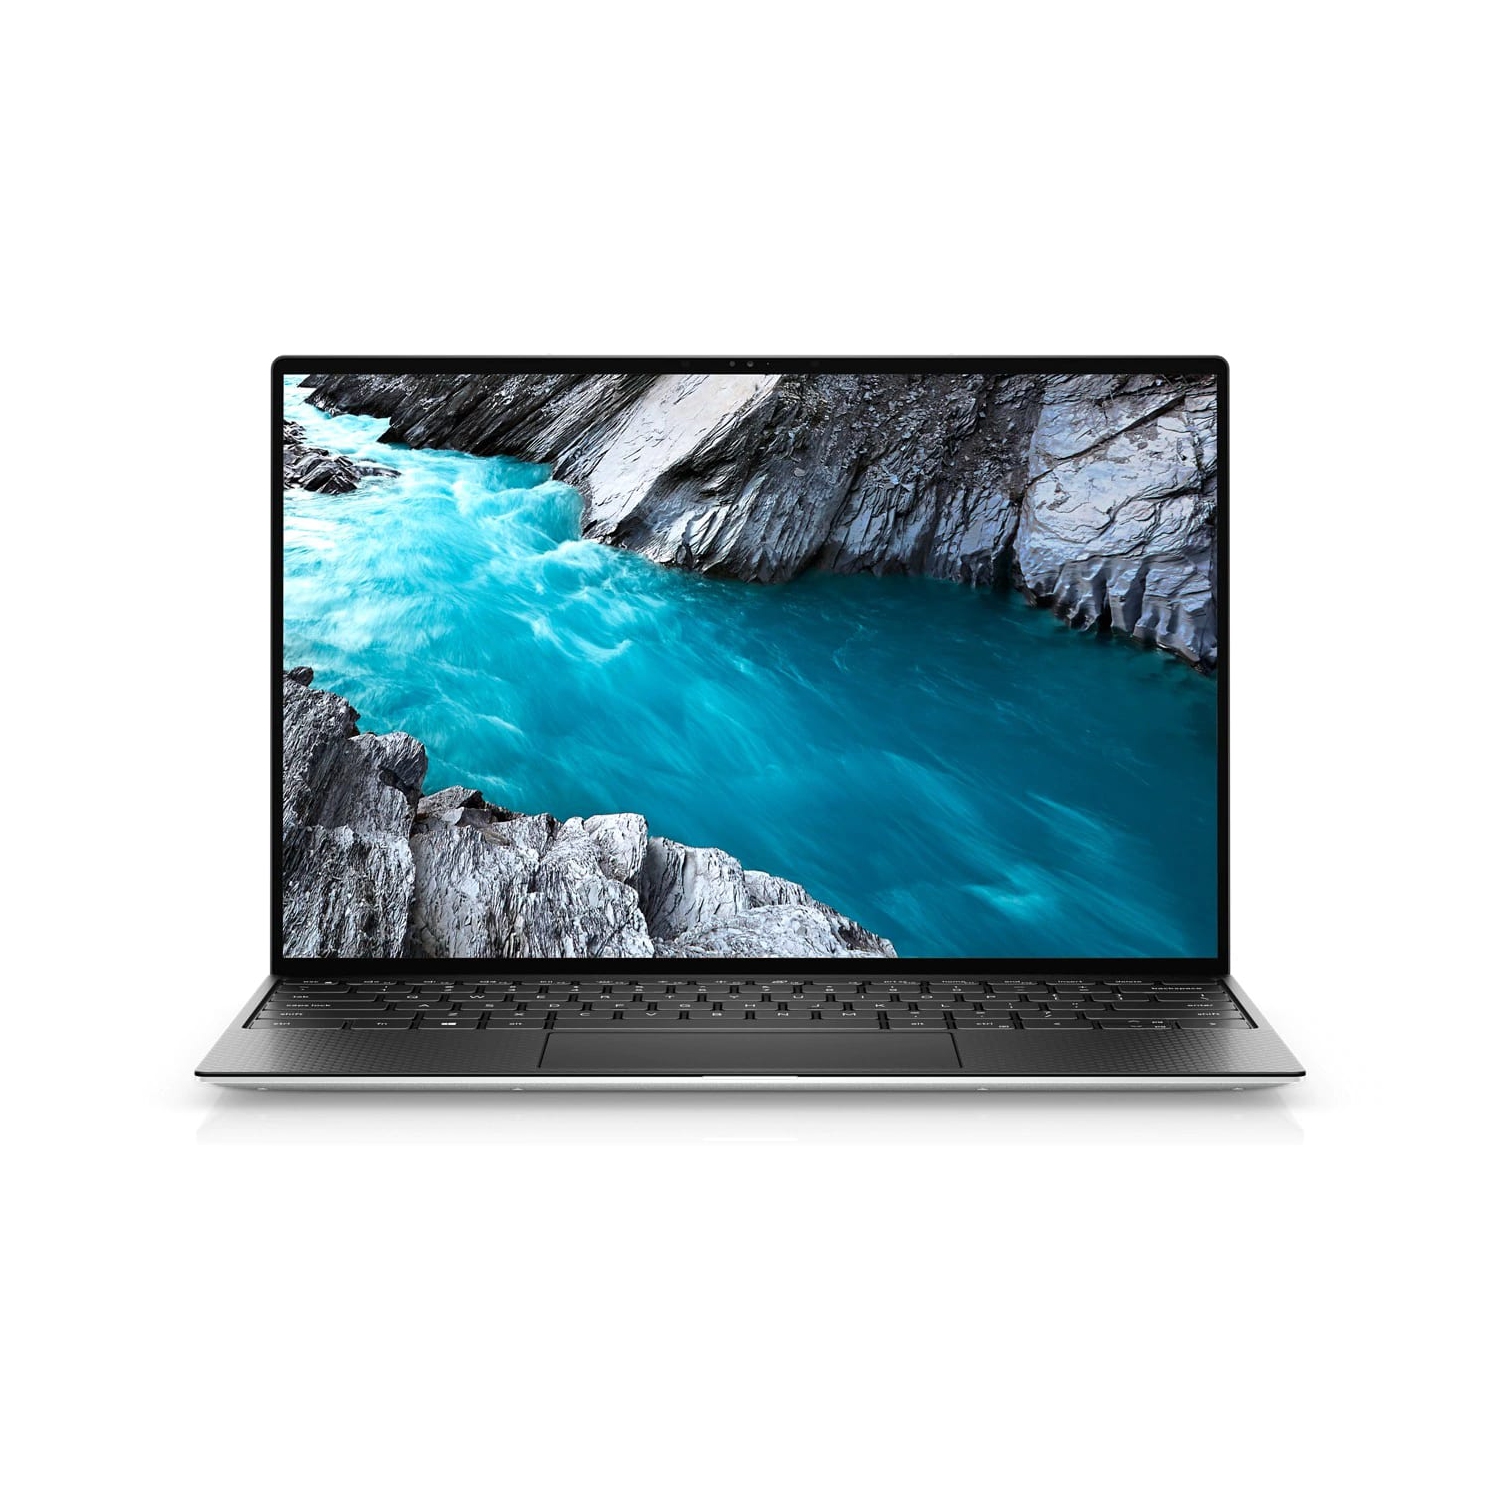 Refurbished (Excellent) - Dell XPS 13 9310 Laptop (2020) | 13.4" 4K Touch | Core i7 - 1TB SSD - 16GB RAM | 4 Cores @ 4.4 GHz - 11th Gen CPU Certified Refurbished